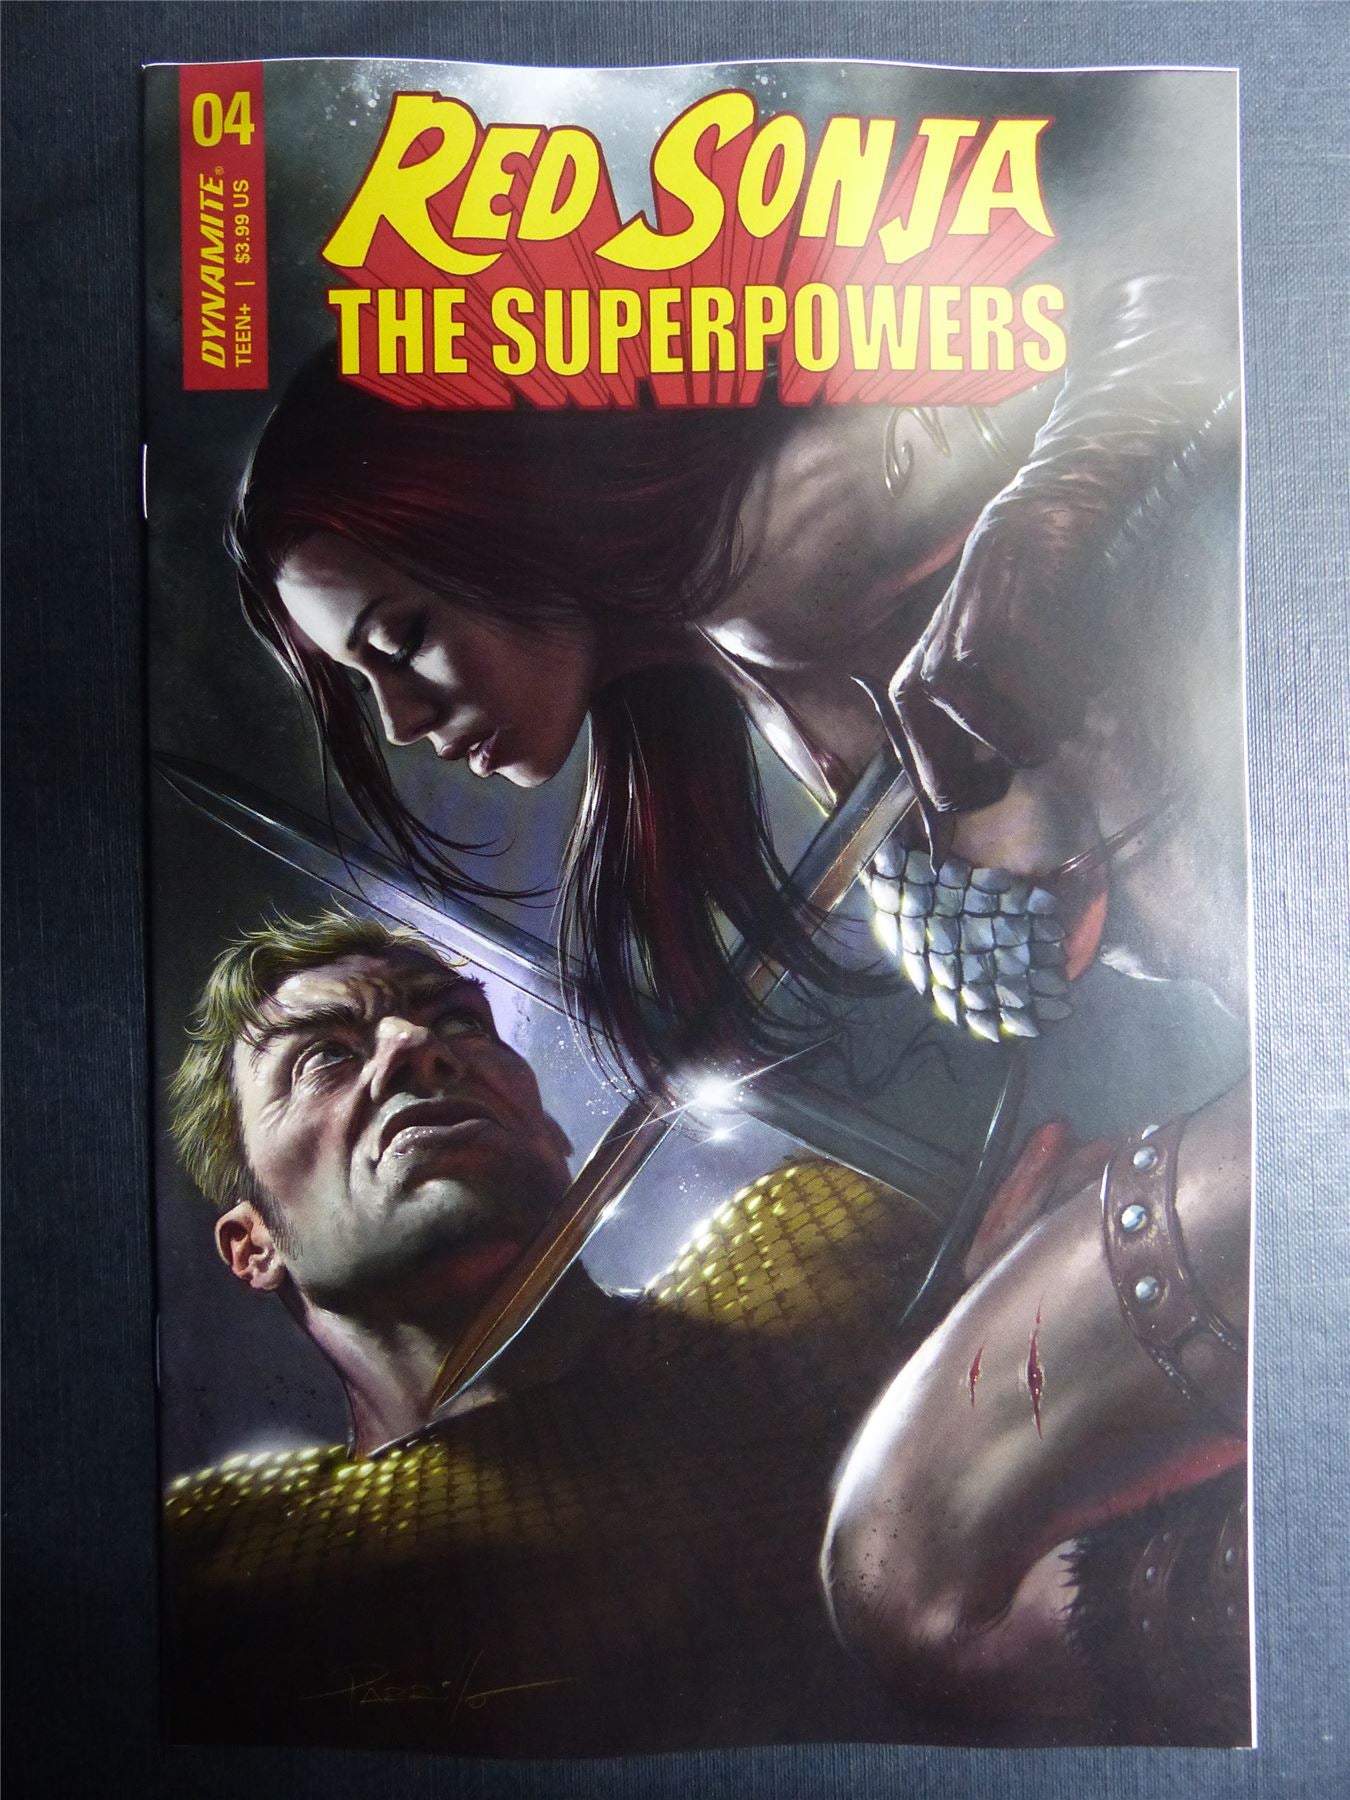 RED Sonja: The Superpowers #4 - Apr 2021 - Dynamite Comics #X9